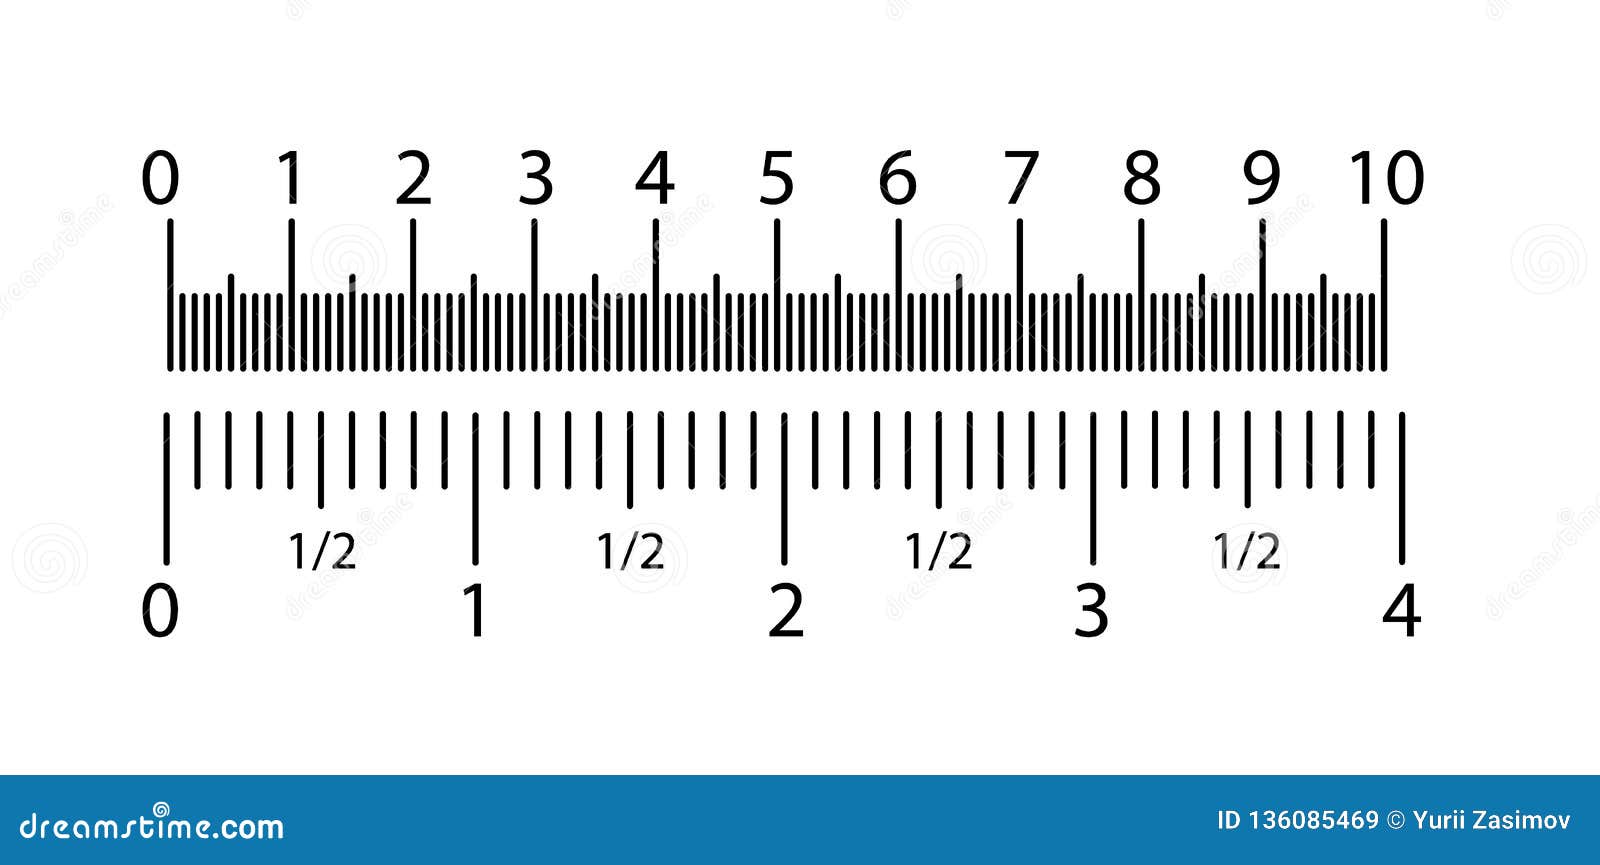 https://thumbs.dreamstime.com/z/inch-metric-rulers-set-centimeters-inches-measuring-scale-cm-metrics-indicator-precision-measurement-centimeter-icon-tools-136085469.jpg